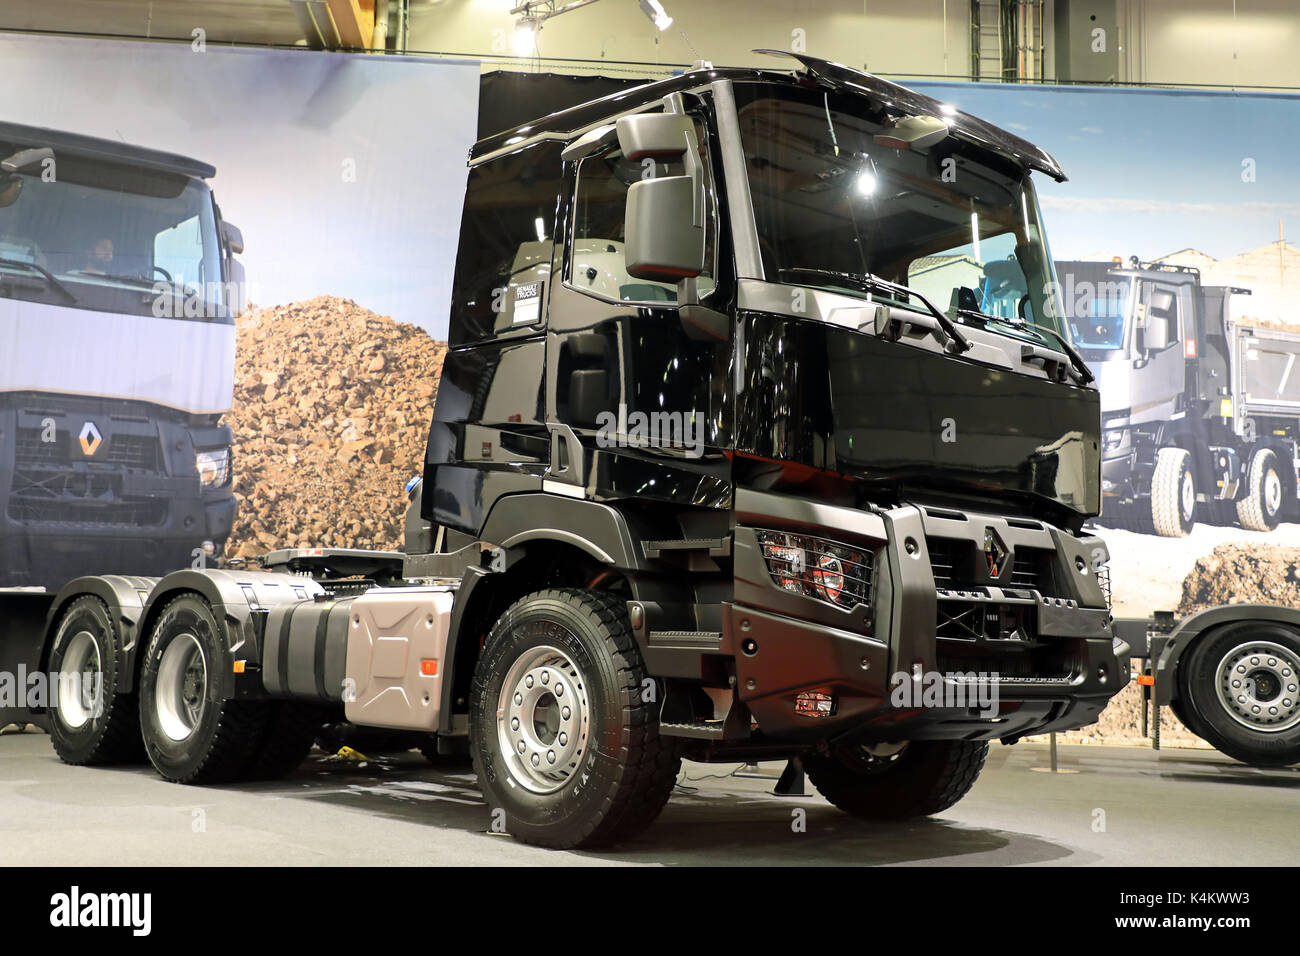 JYVÄSKYLÄ, FINLAND - MAY 18, 2017: Renault Trucks C for construction presented on Kuljetus 2017, a professional event for transportation and logistics Stock Photo